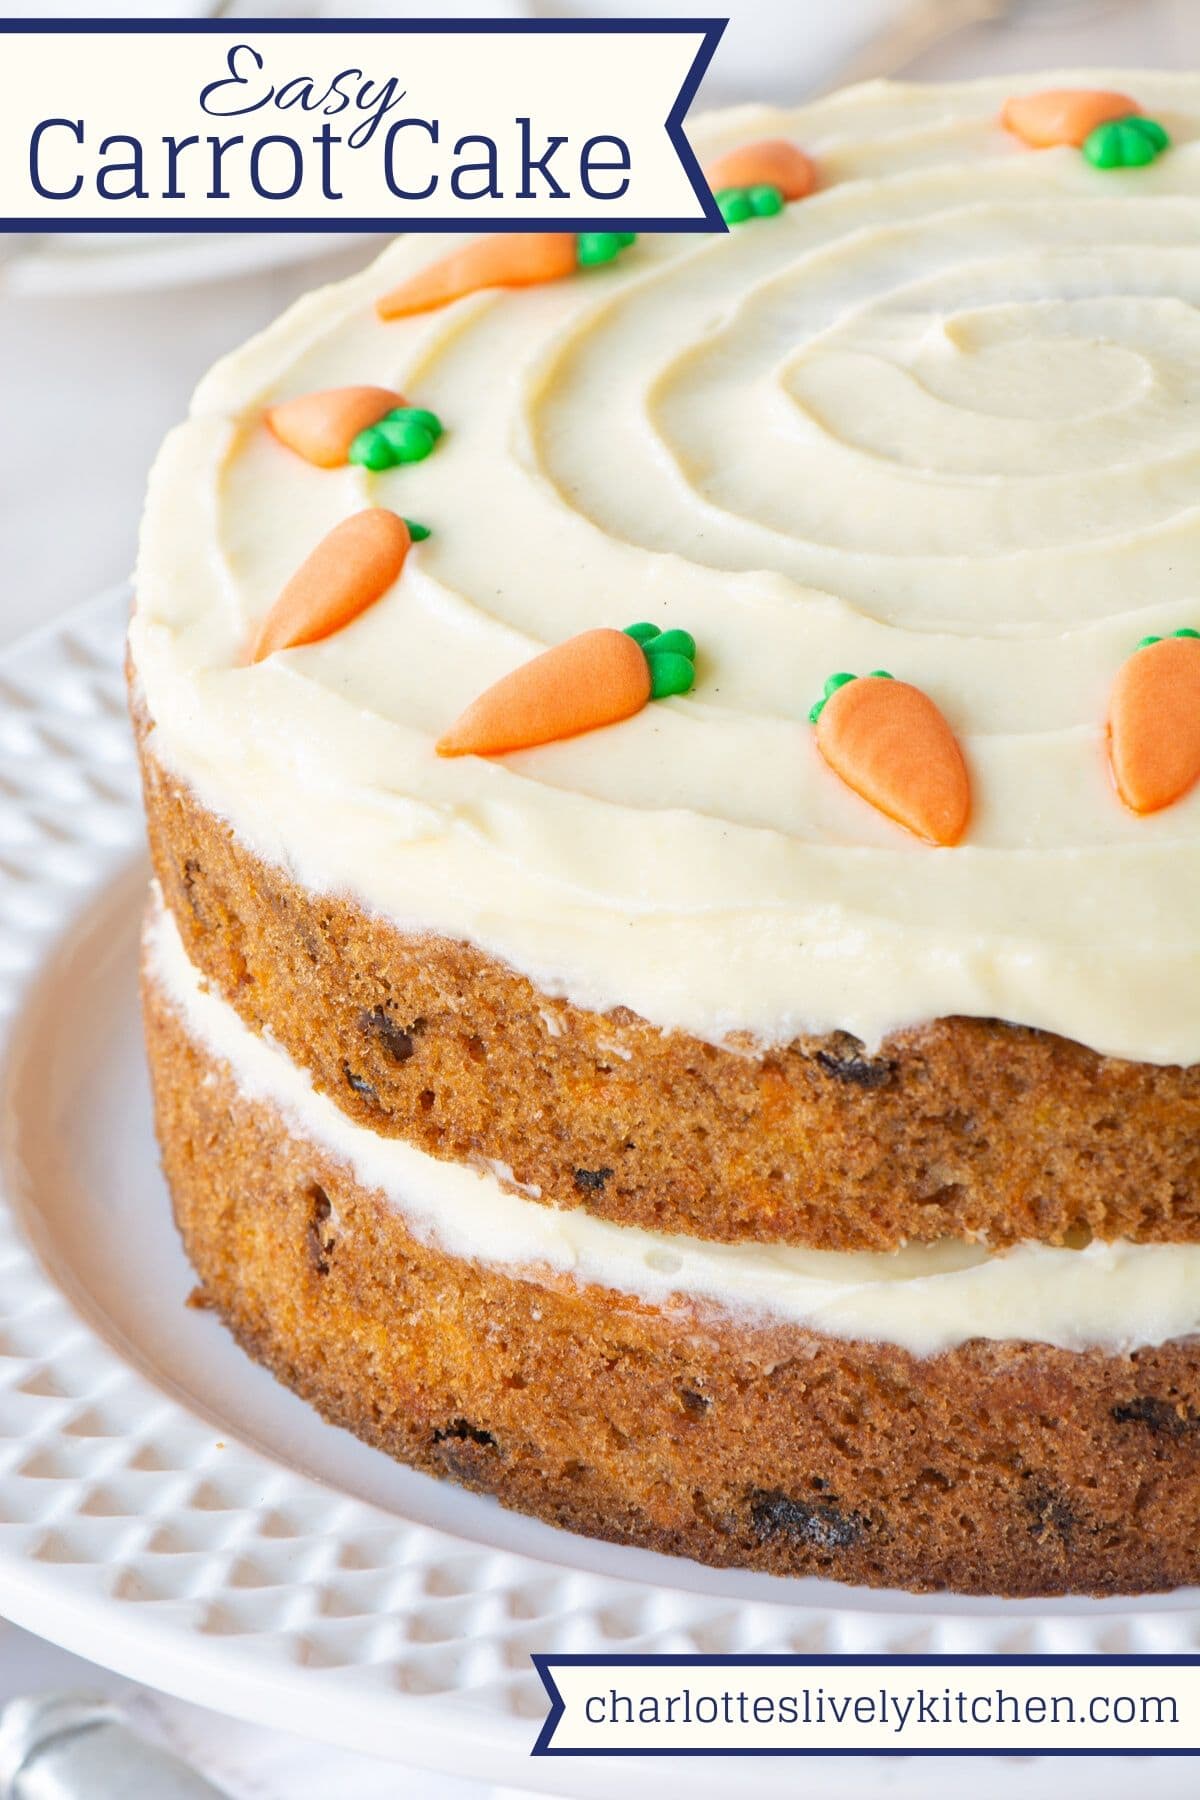 A two-later carrot cake with cream cheese buttercream, decorated with sugar carrots. The image has the text Easy Carrot Cake at the top.